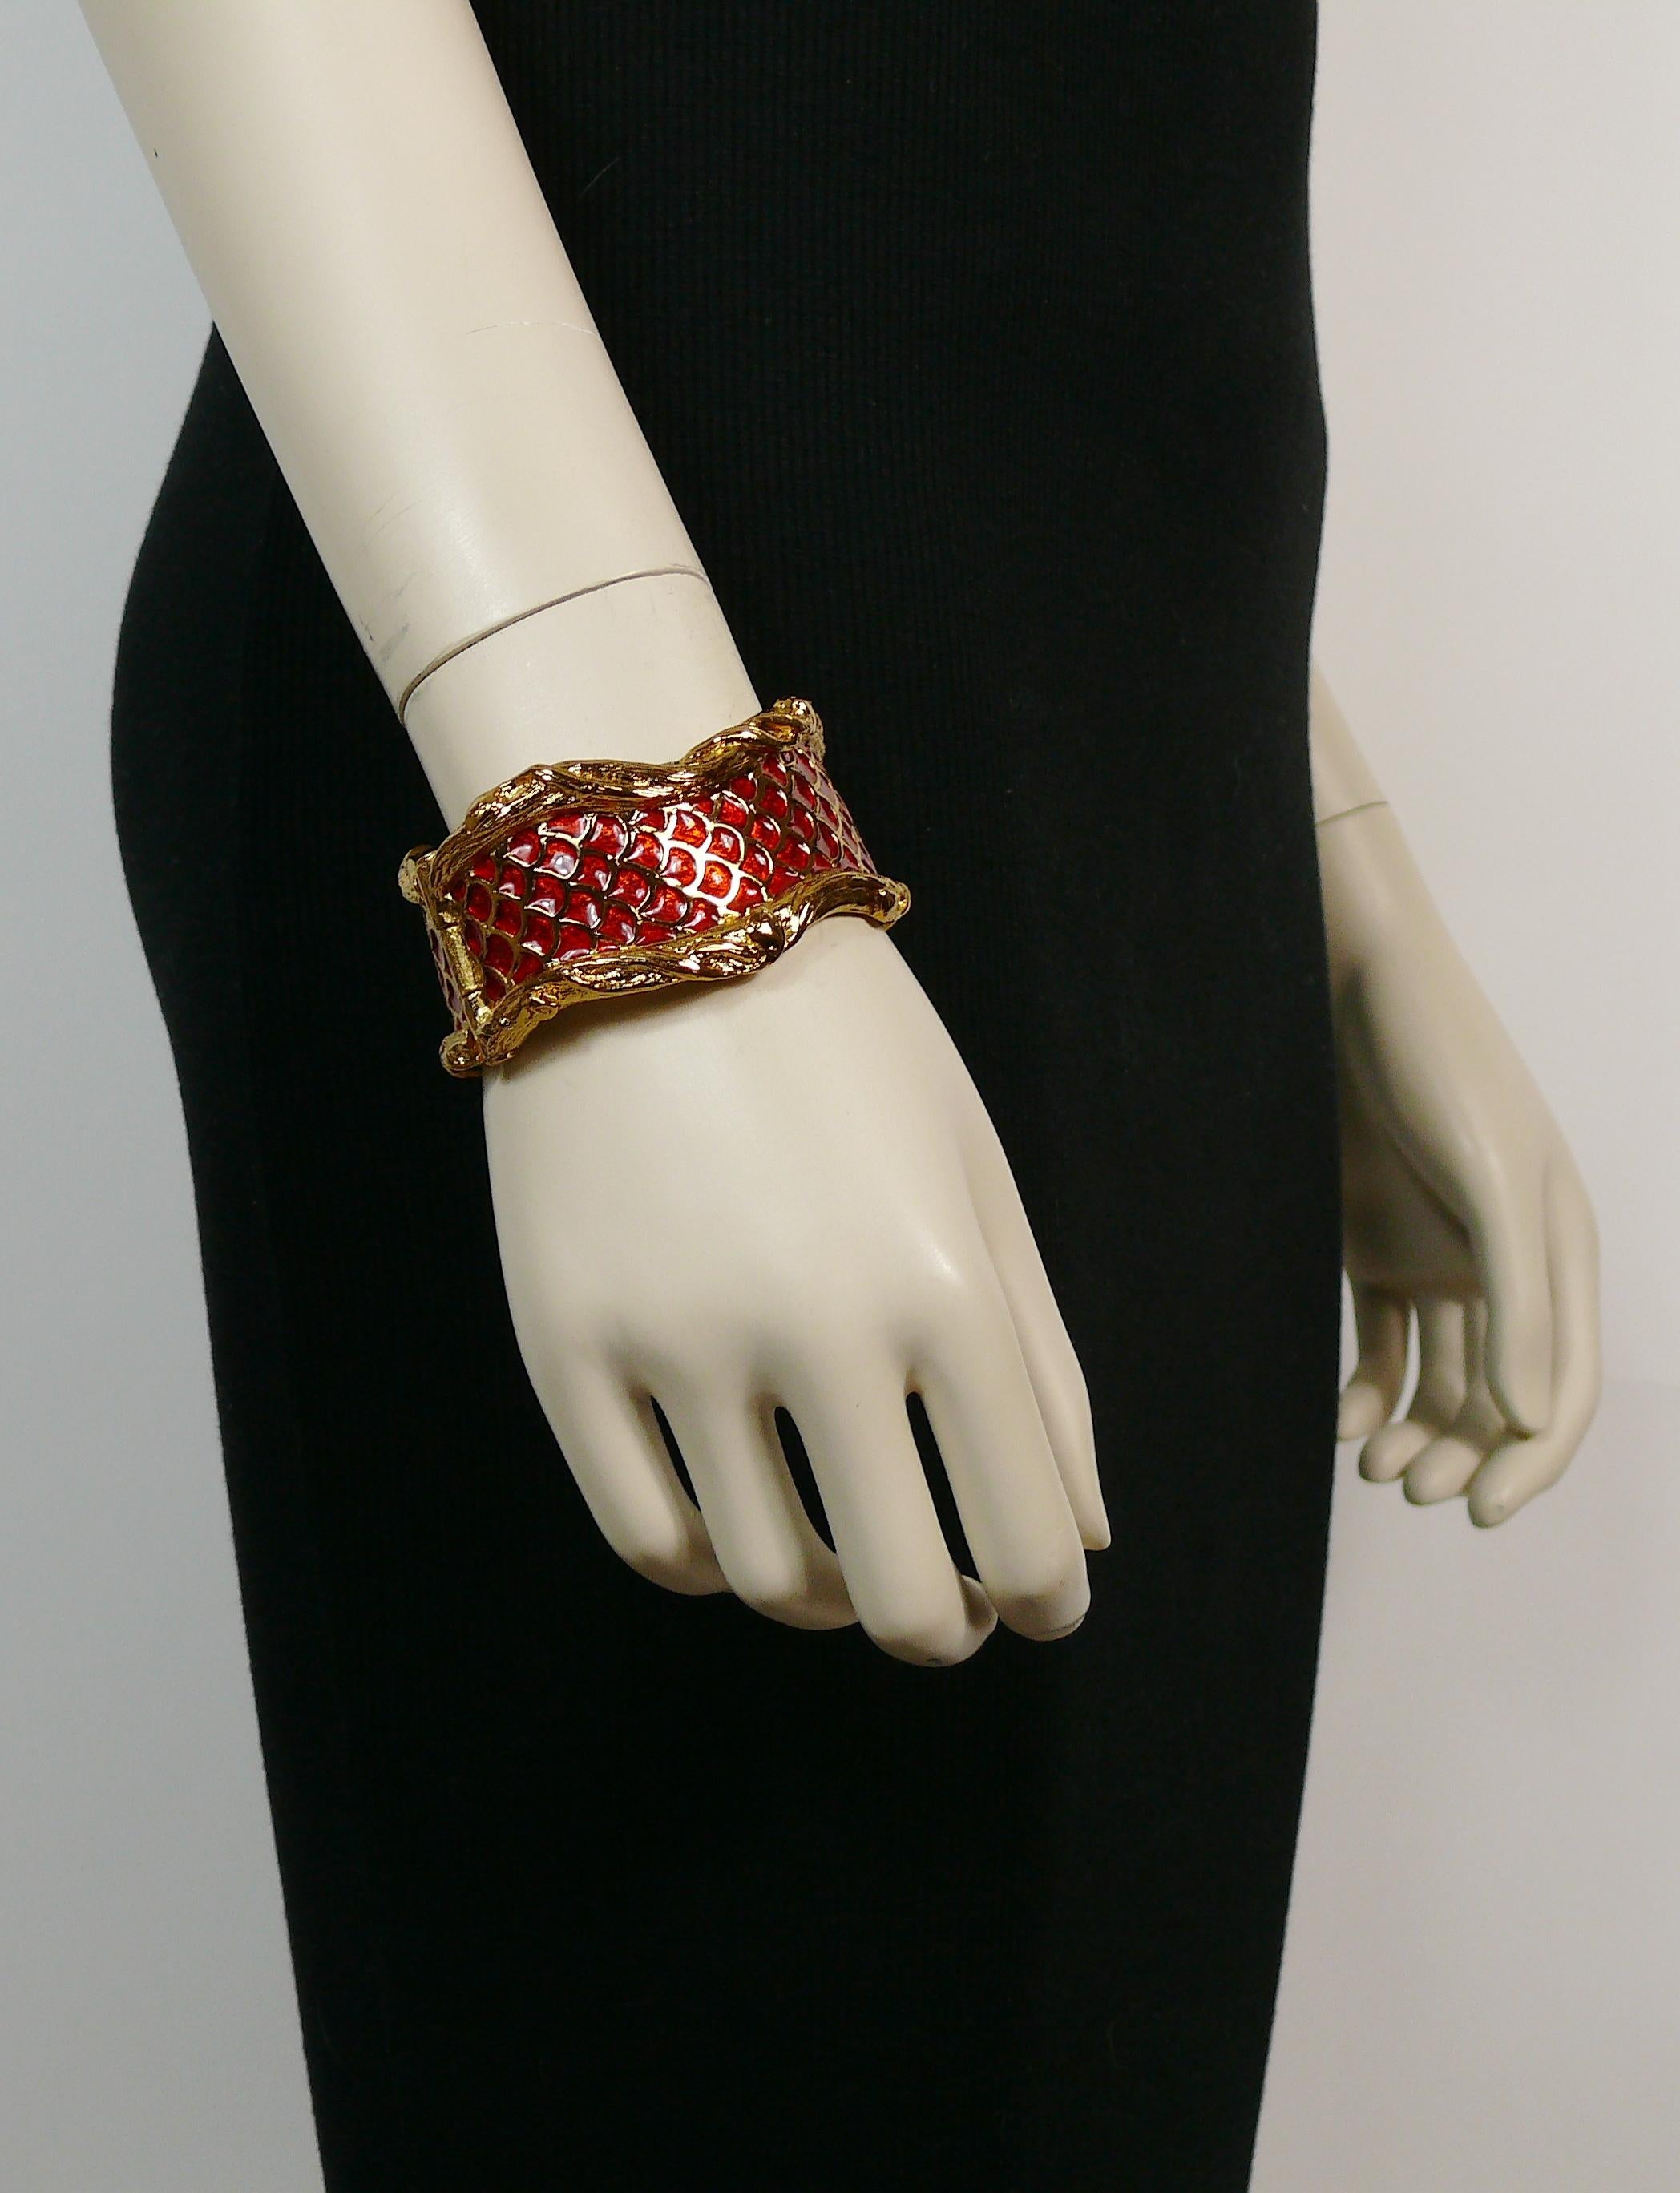 YVES SAINT LAURENT vintage gold toned bracelet featuring coiled snakes/serpents embellished with red enamel.

Embossed YSL Made in France.

Indicative measurements : inner measurements approx. 5.7 cm x 5 cm (2.24 inches x 1.97 inches) / width